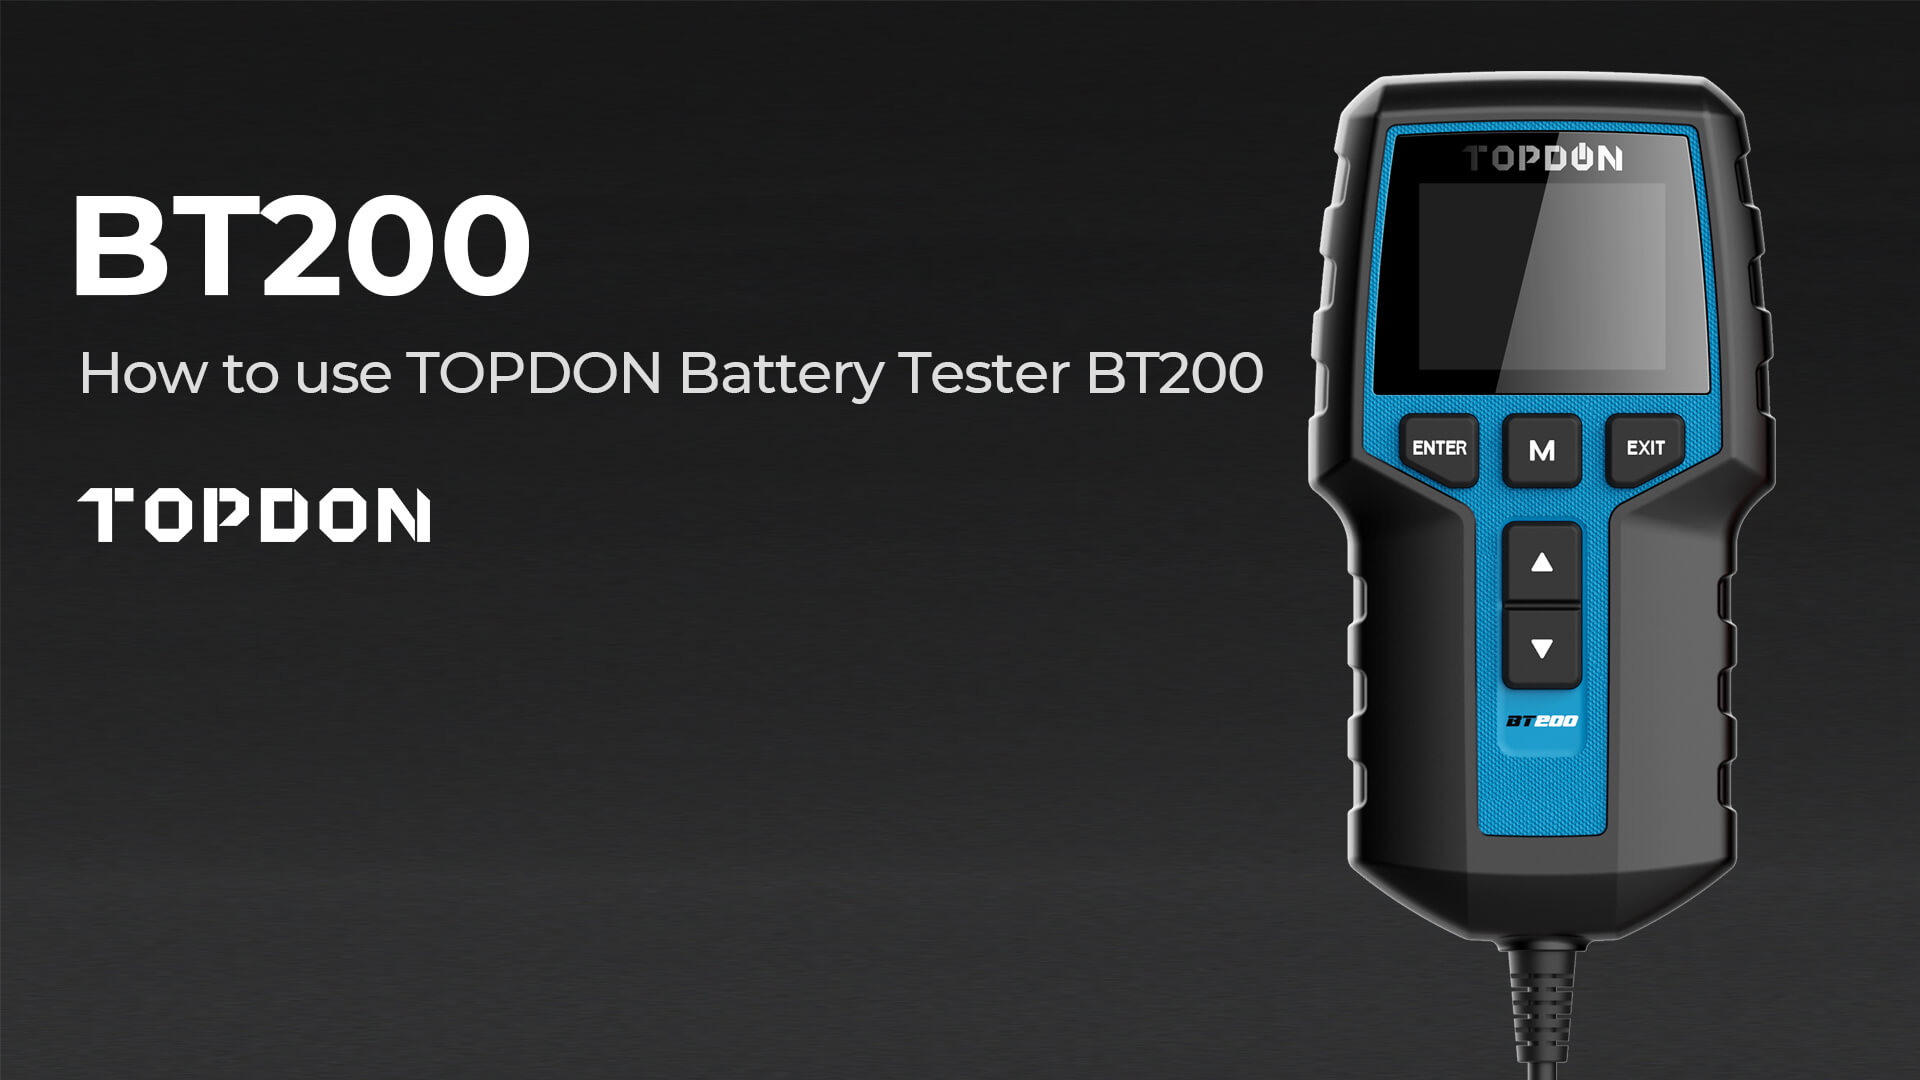 How to use TOPDON Battery Tester BT200?